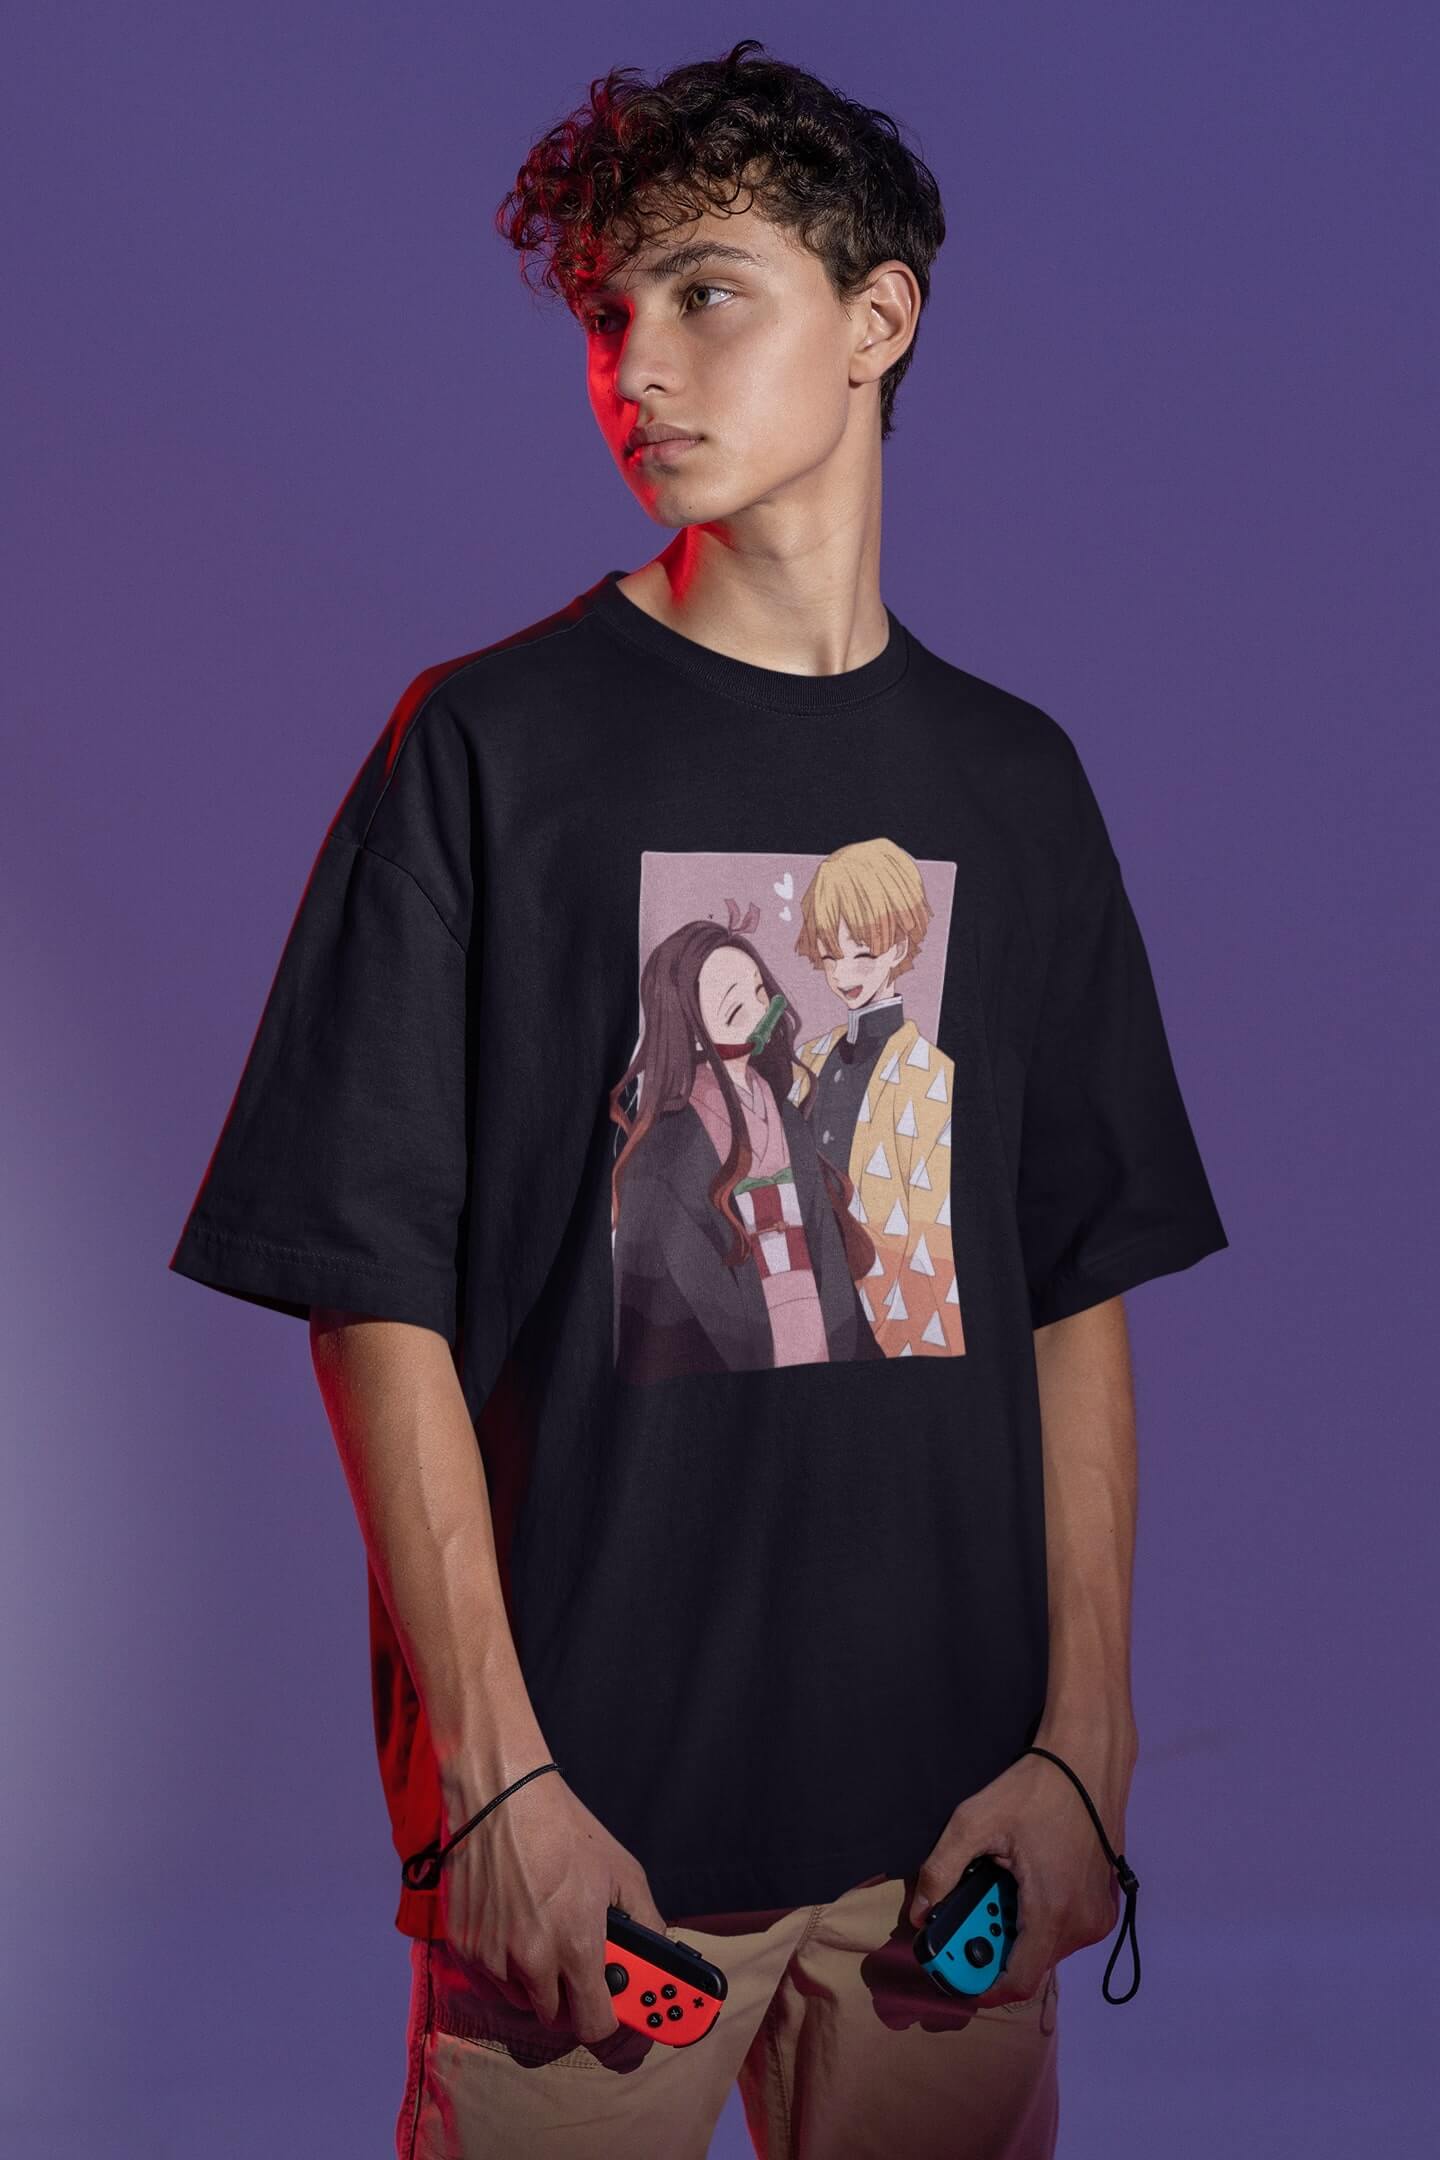 tokui on X: NEZUKO FINISHED AND FIXED AND ON SALE SHIRT: https